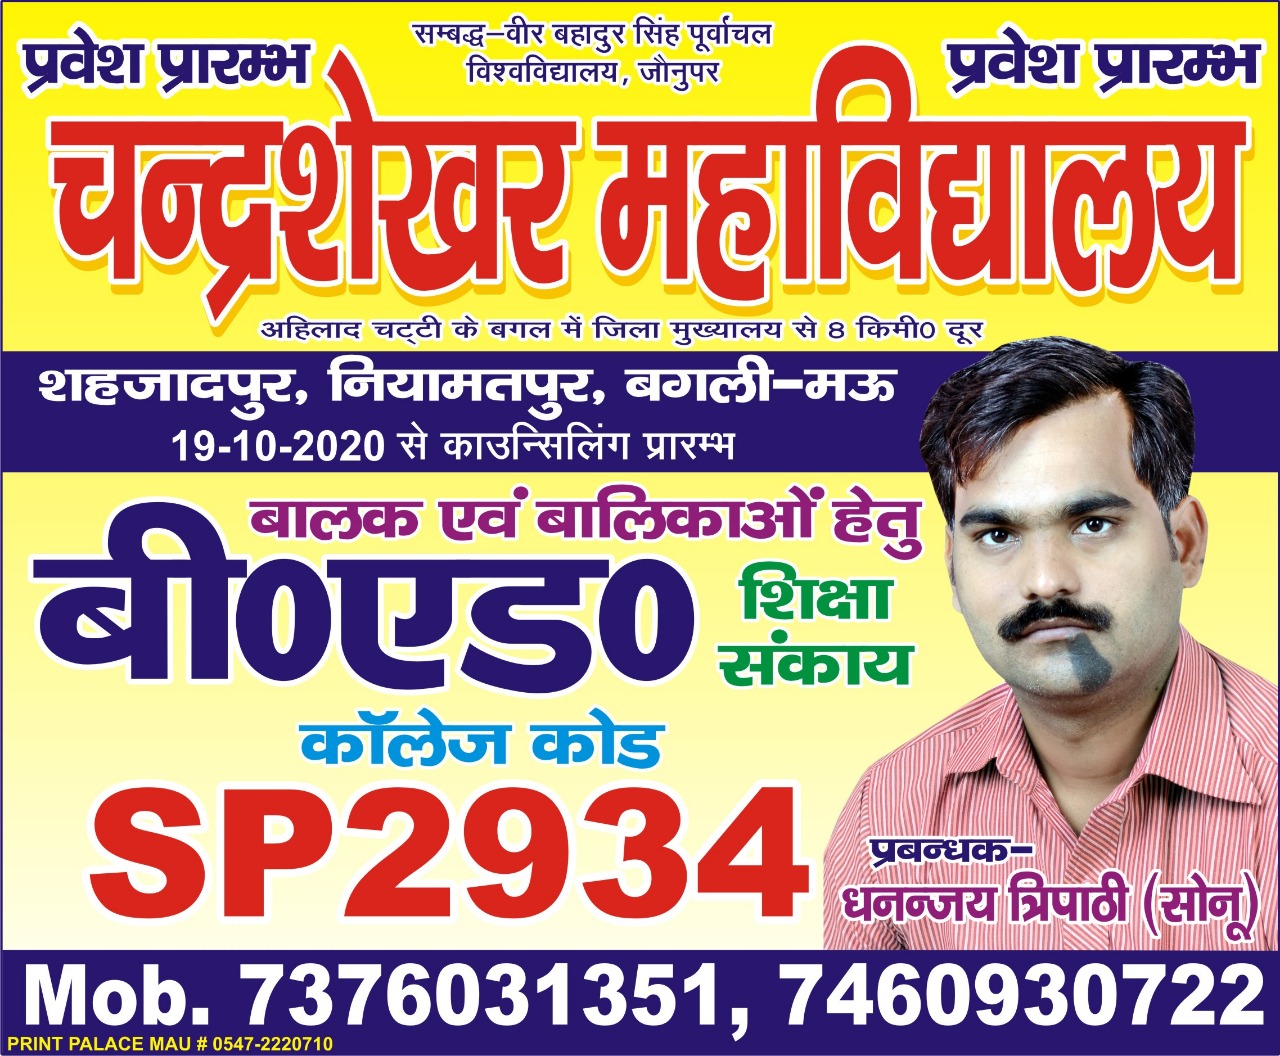 Contact for advertisement:- 6386995998